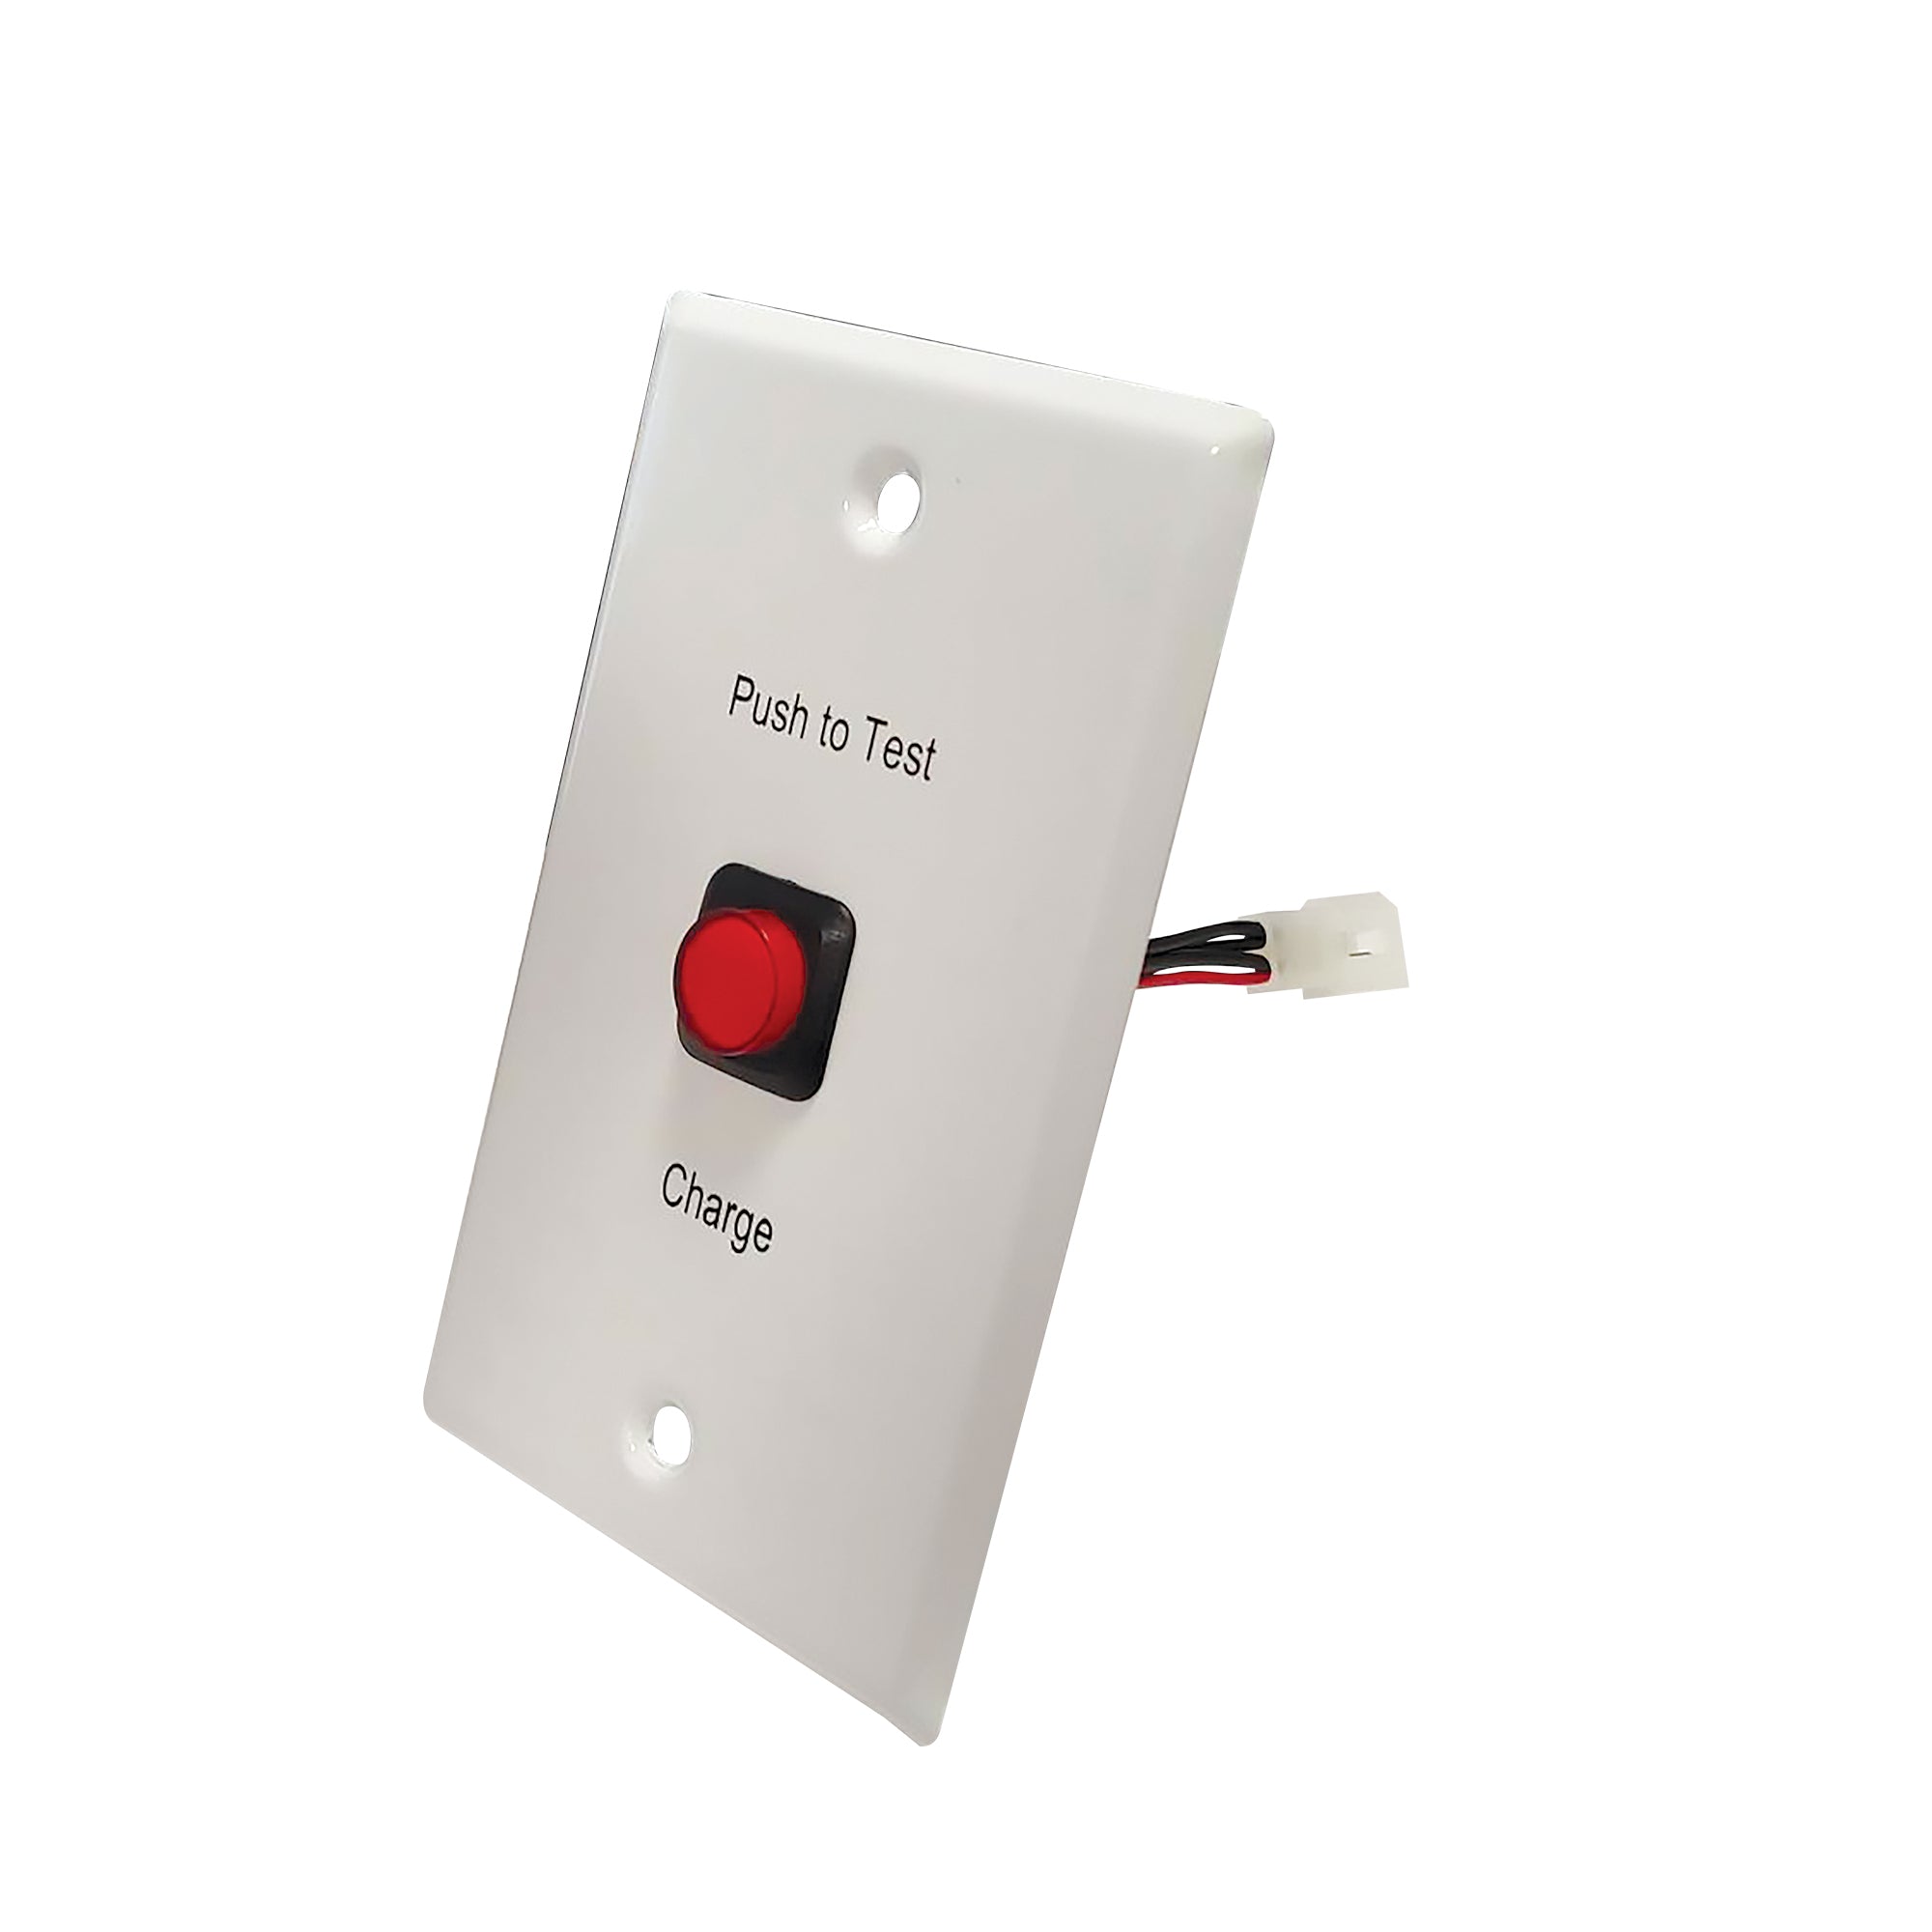 Nora Lighting NEPKA-07LEDFPTS - Exit / Emergency - Replacement Face Plate and Test Switch for NEPK-07LEDUNV